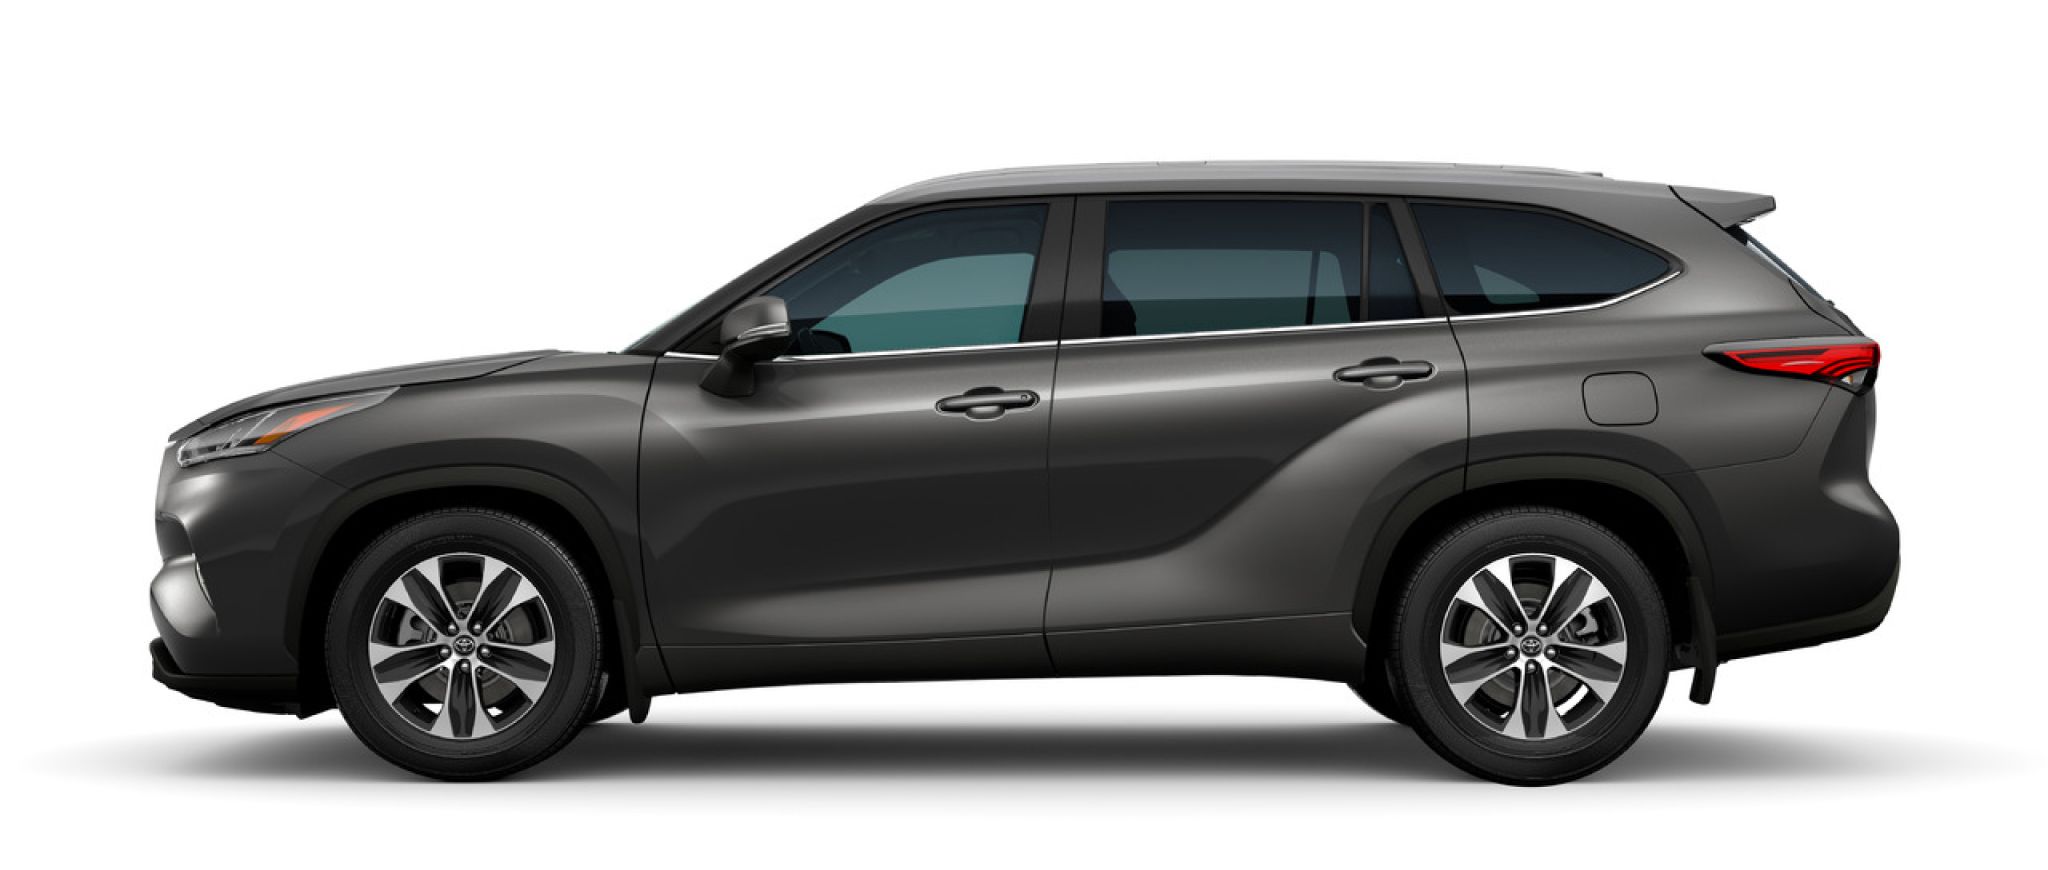 Side view of a 2022 Toyota Highlander SUV in Magnetic Gray color on a white background.